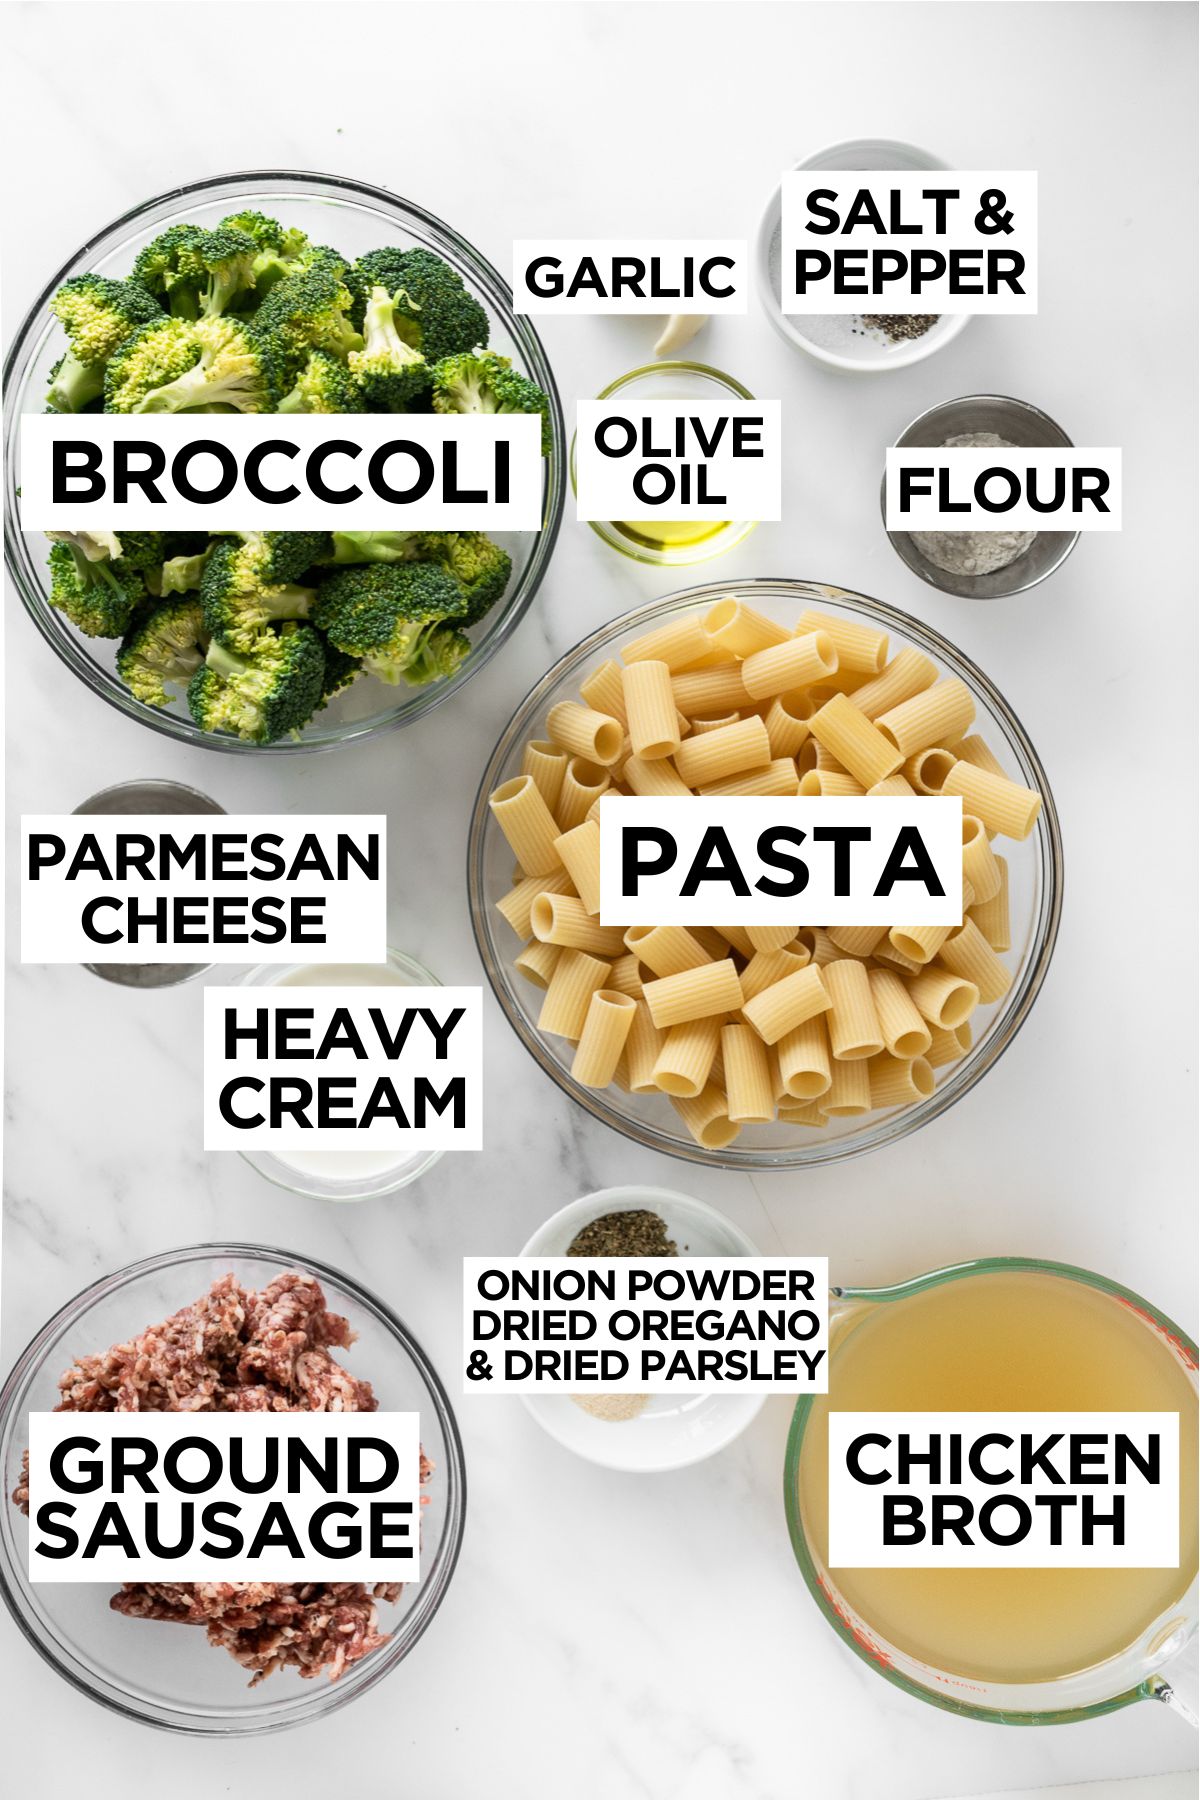 Look no further than this creamy one pot sausage broccoli pasta recipe for your next satisfying weeknight meal. Packed with flavor and convenience, this pasta dish checks all the boxes– minimal effort, easy clean up and done in 30 minutes! This sausage broccoli pasta is everything you want dinner to be and makes great leftovers.